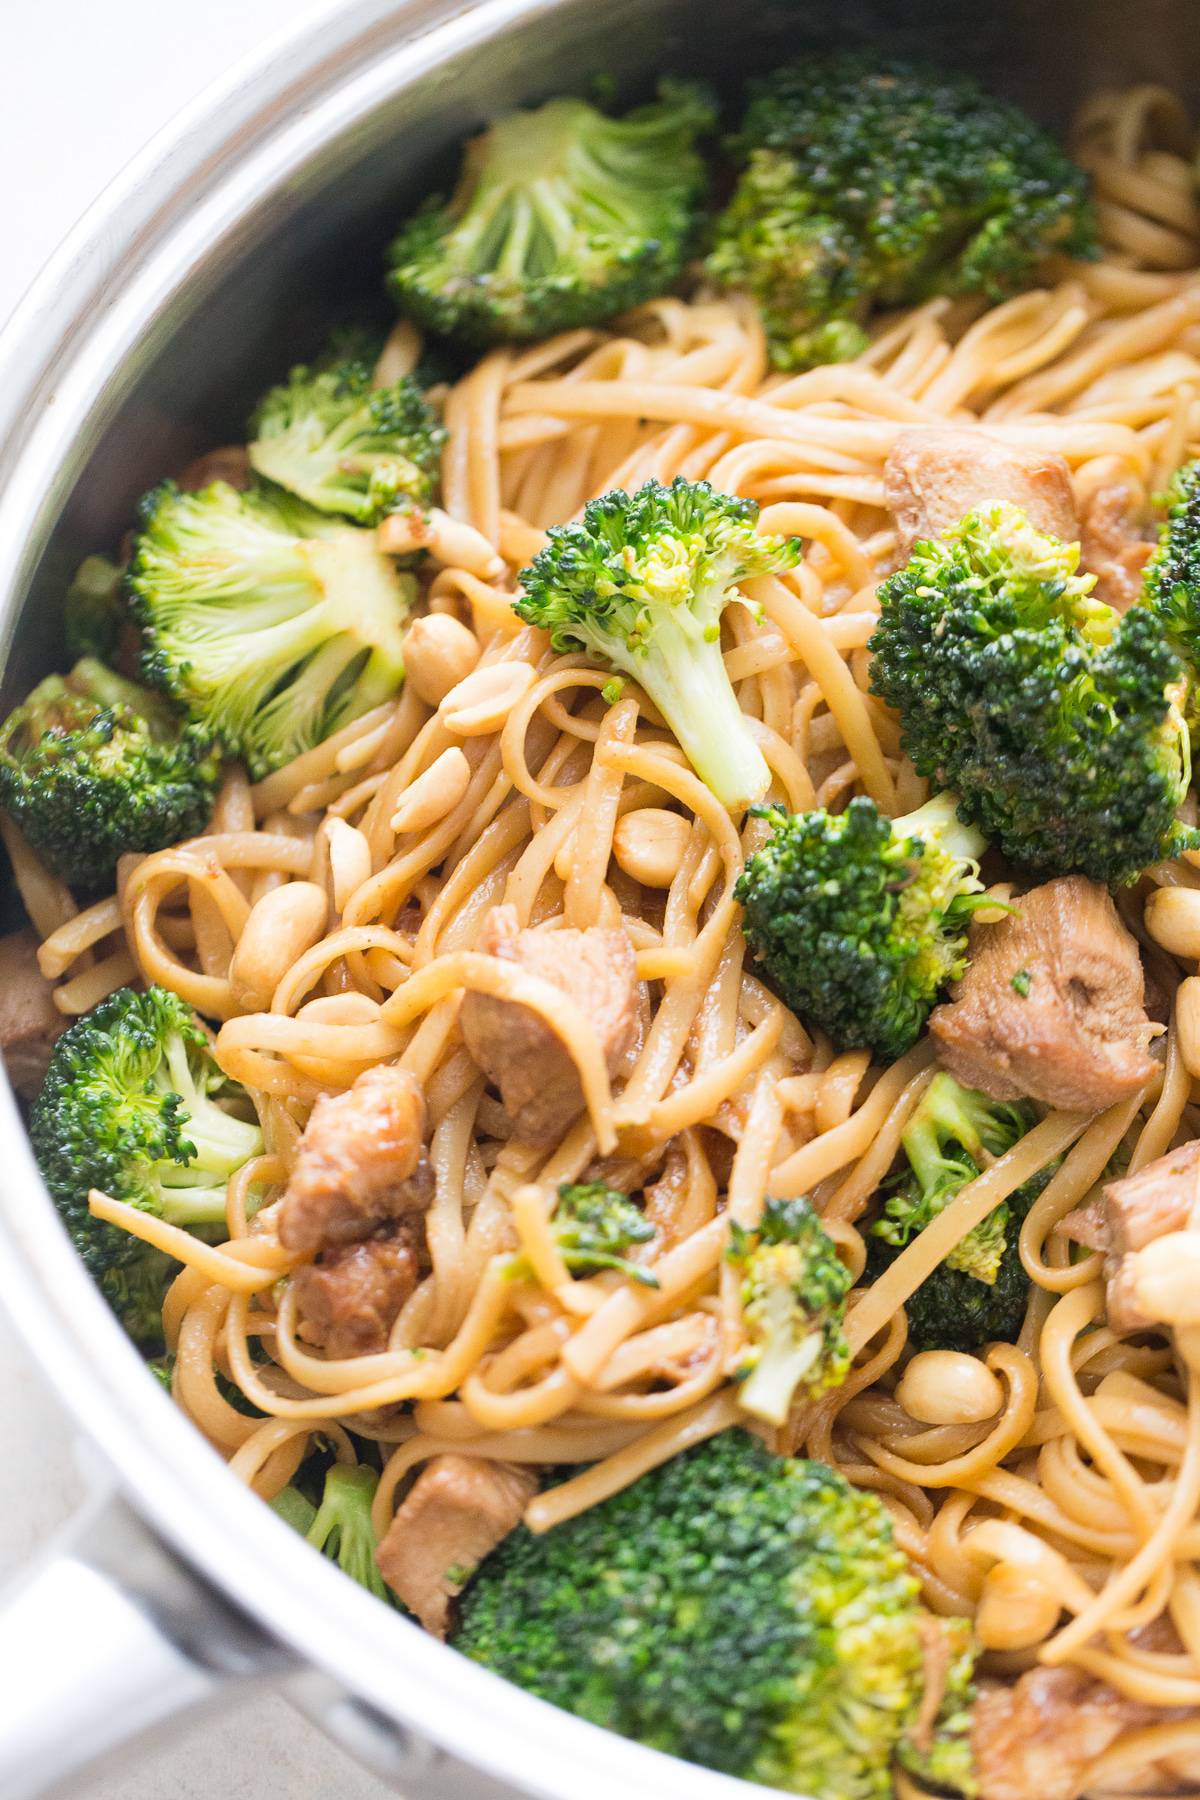 Chicken and Broccoli Stir Fry over Peanut Butter Noodles ...